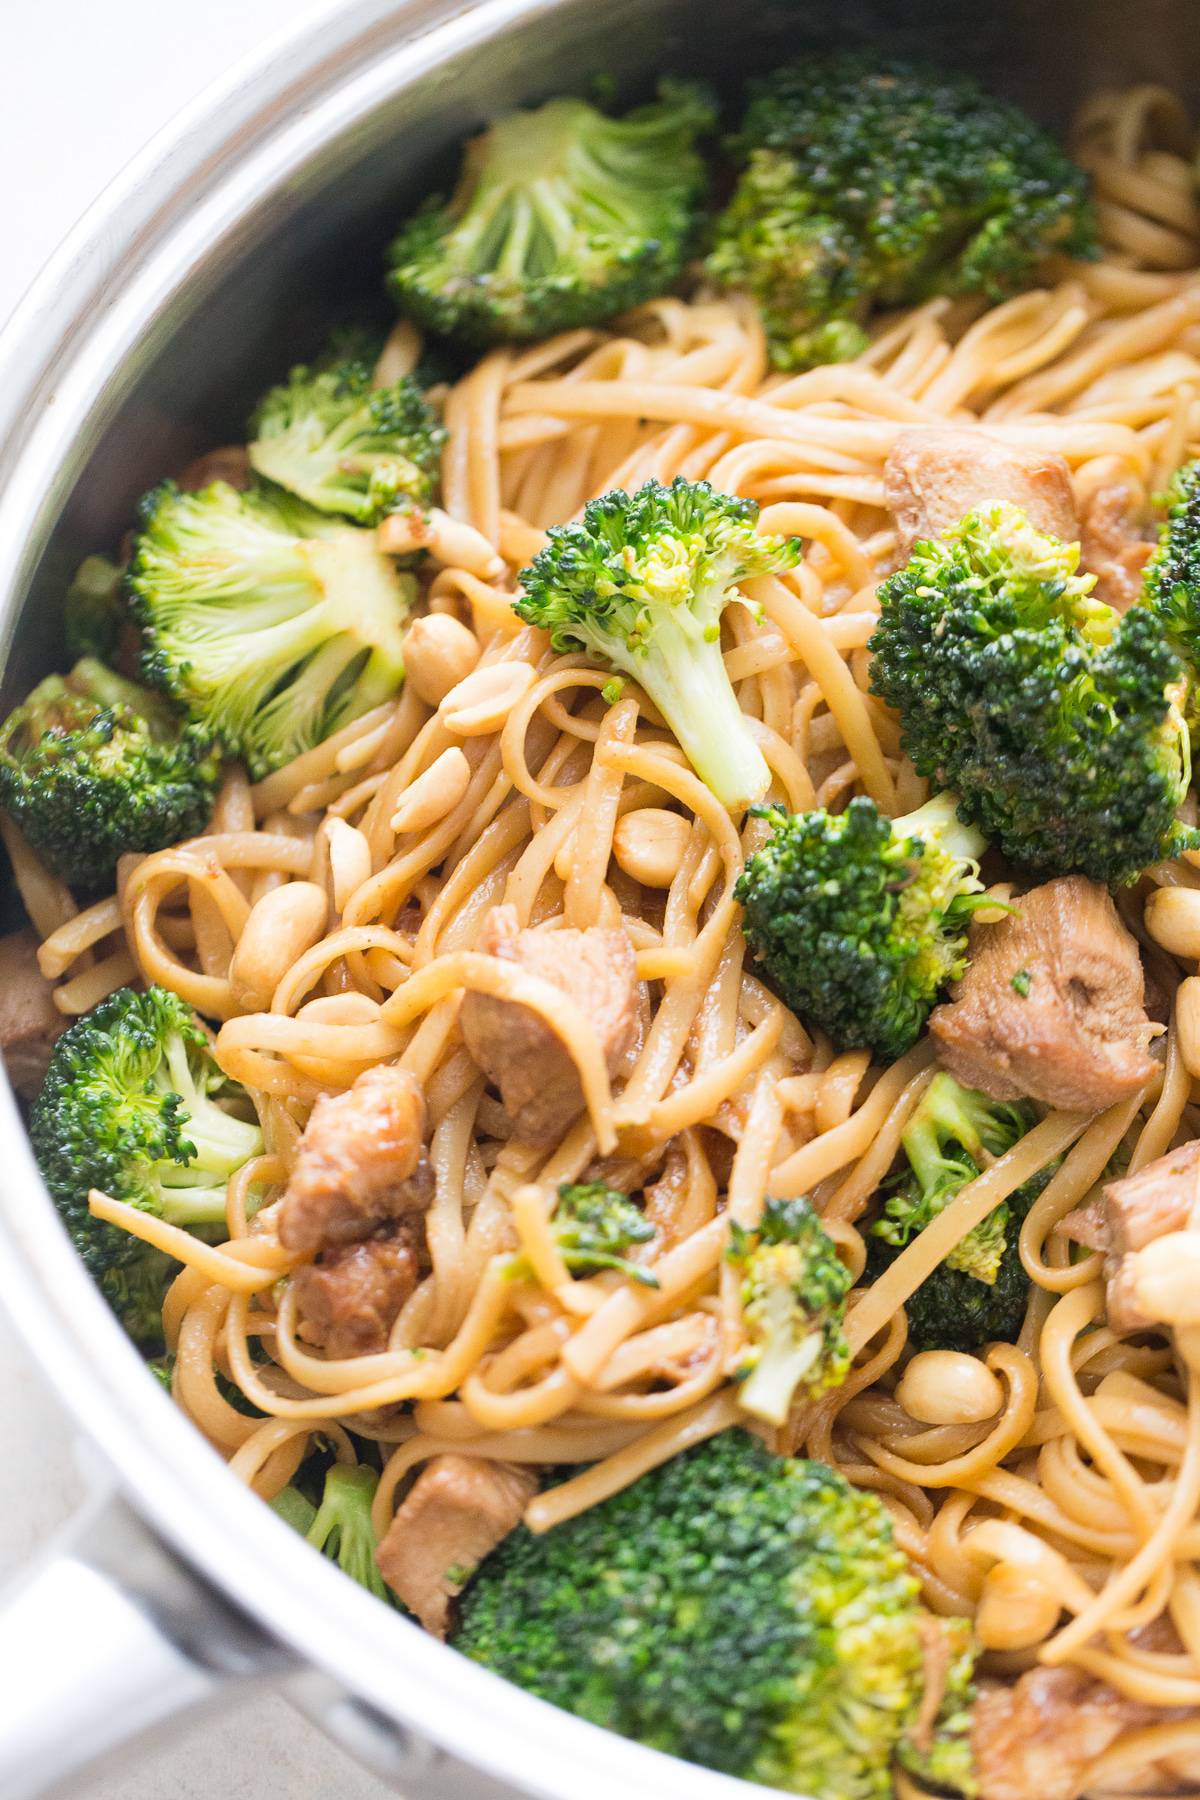 Chicken and Broccoli Stir Fry over Peanut Butter Noodles ...